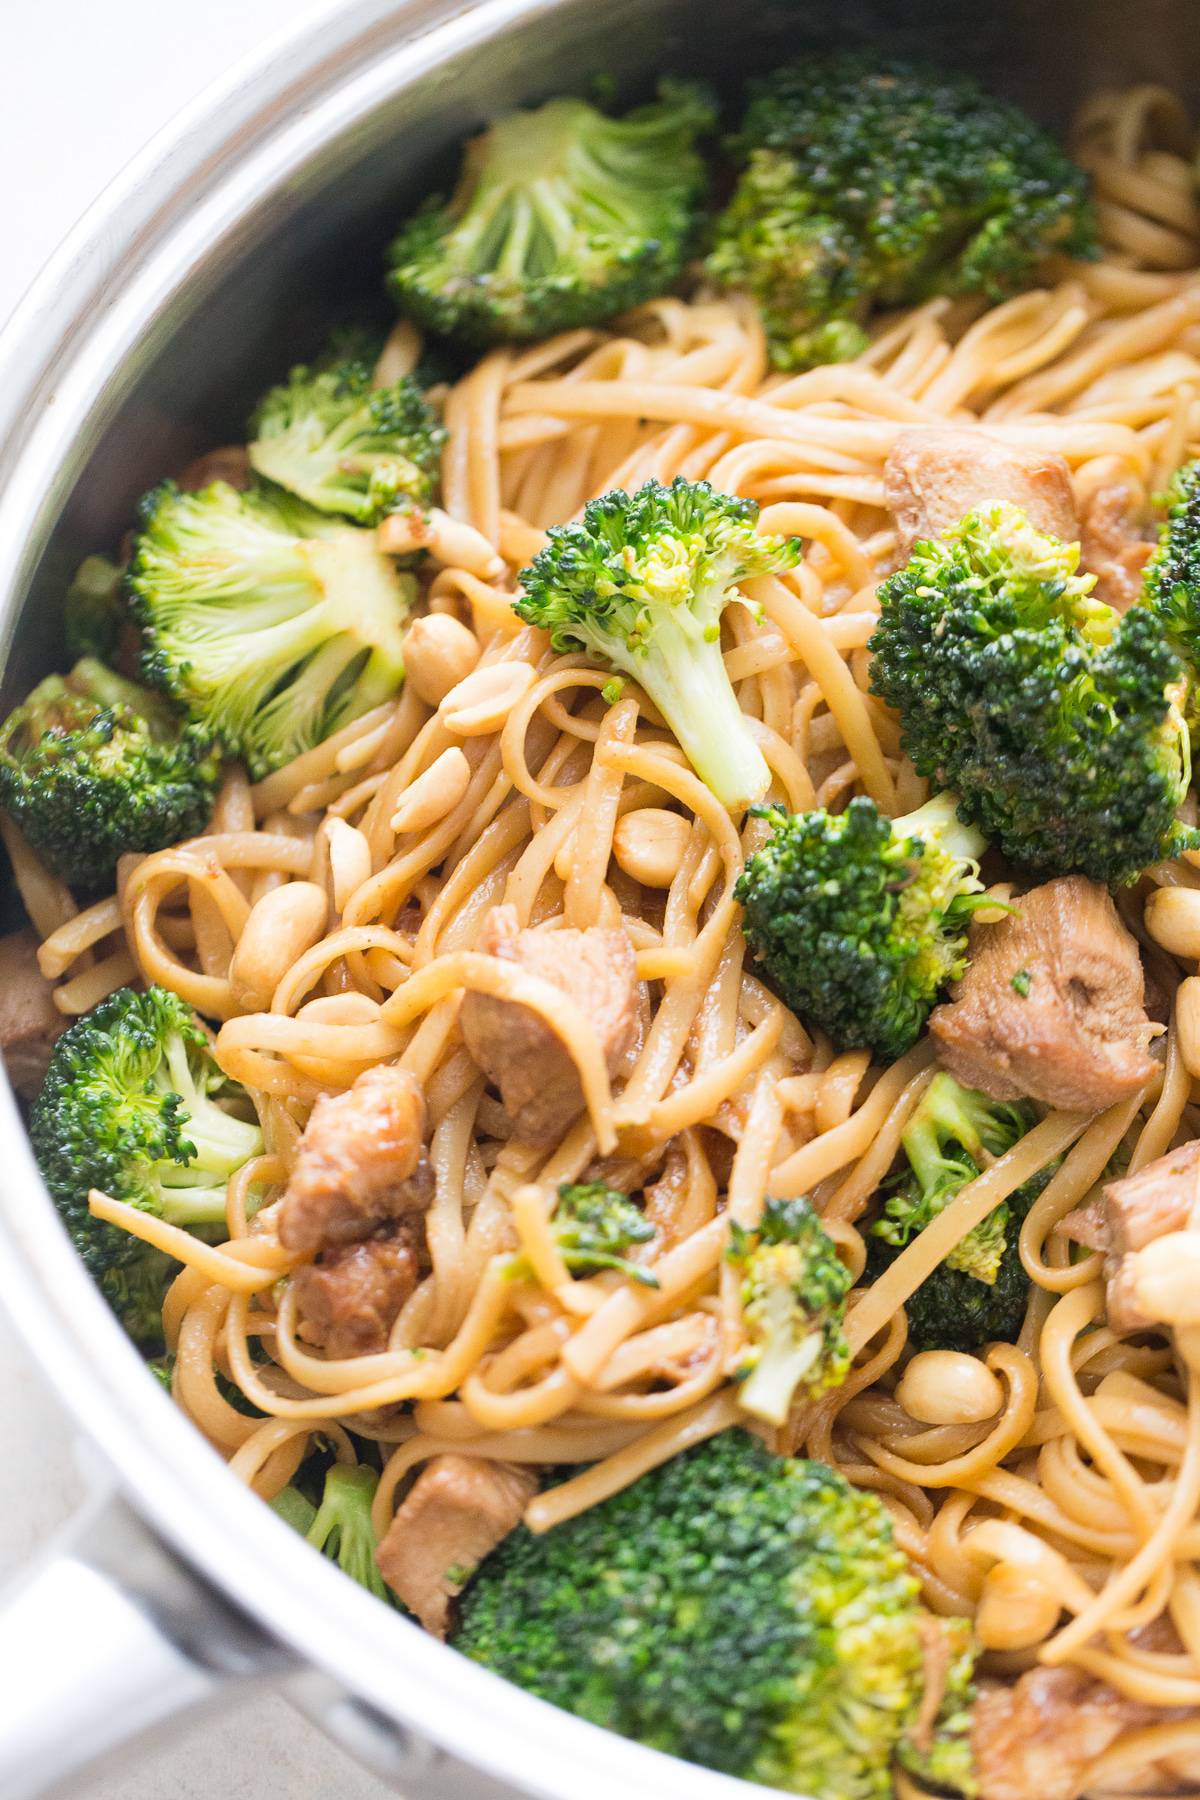 Chicken and Broccoli Stir Fry over Peanut Butter Noodles ...